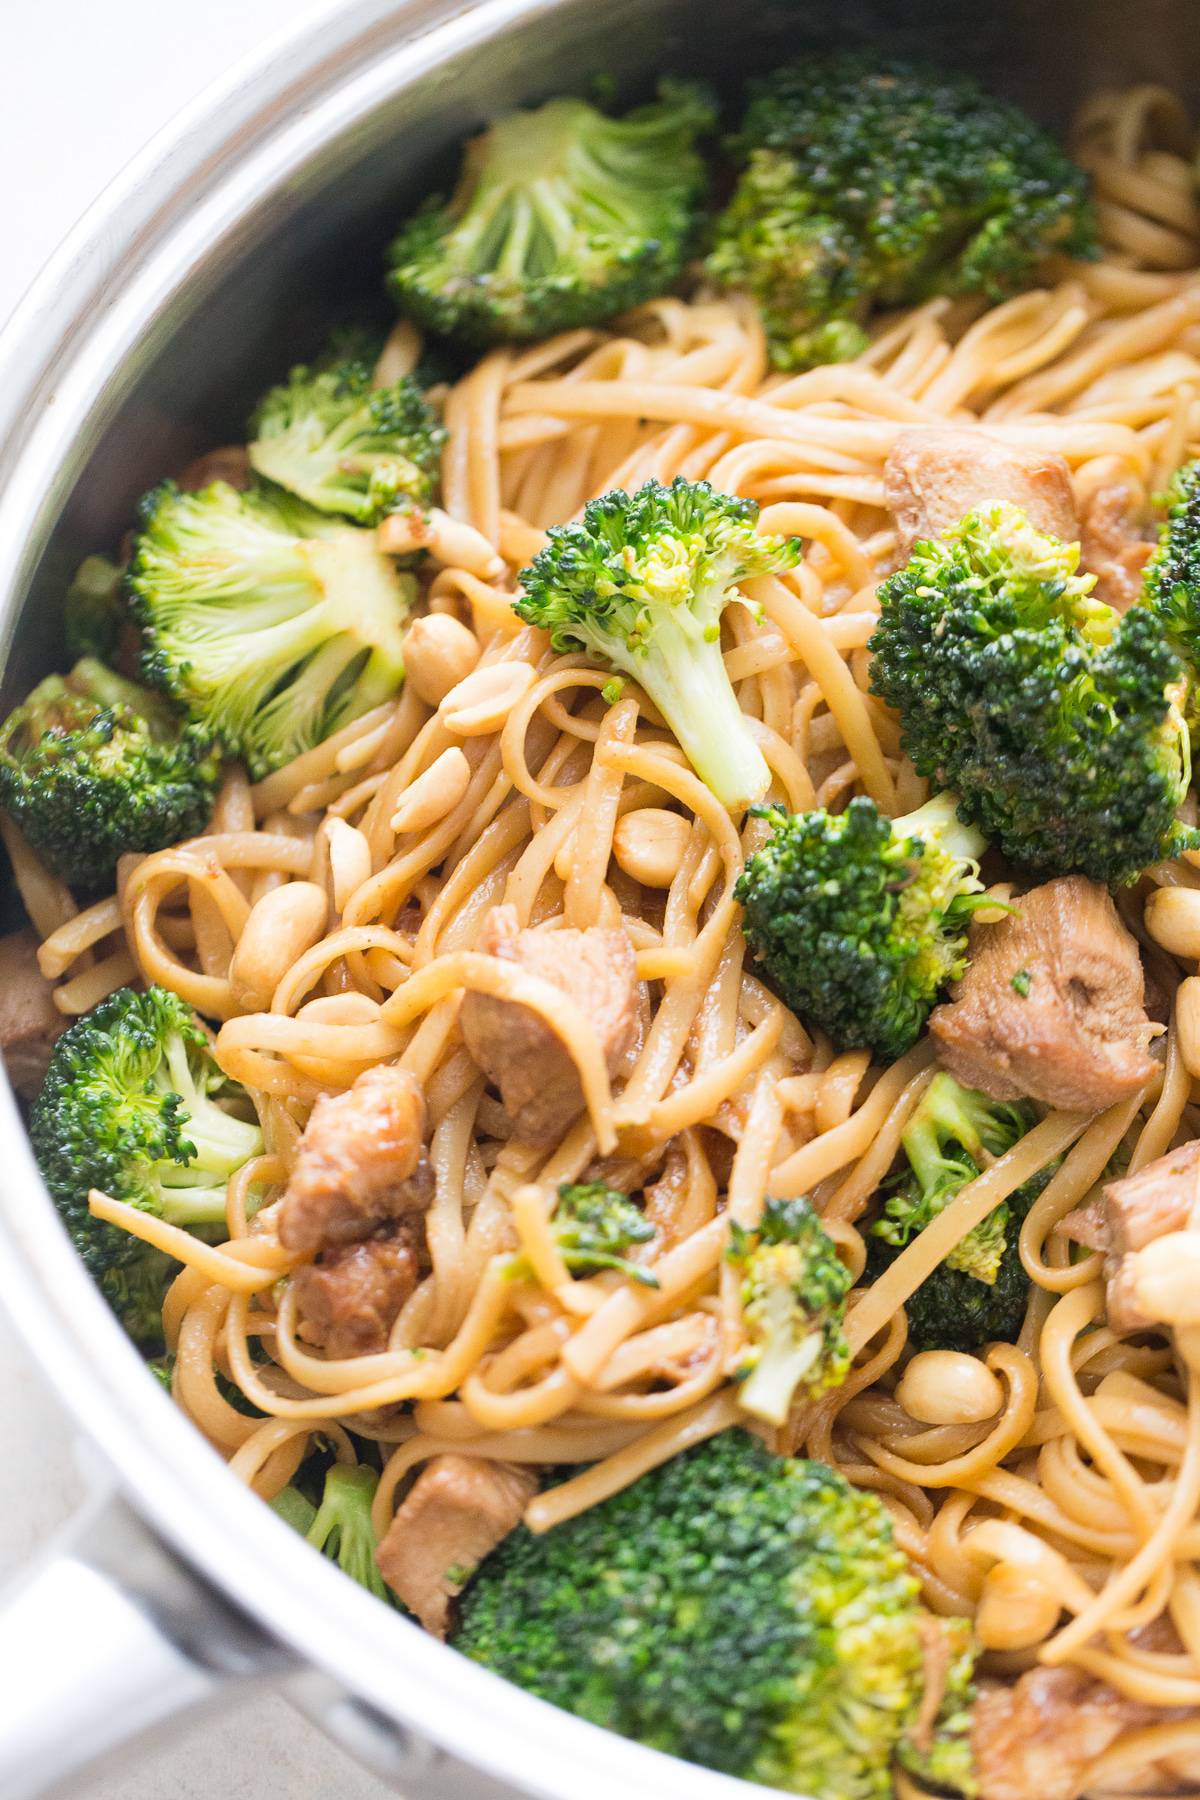 Chicken and Broccoli Stir Fry over Peanut Butter Noodles ...